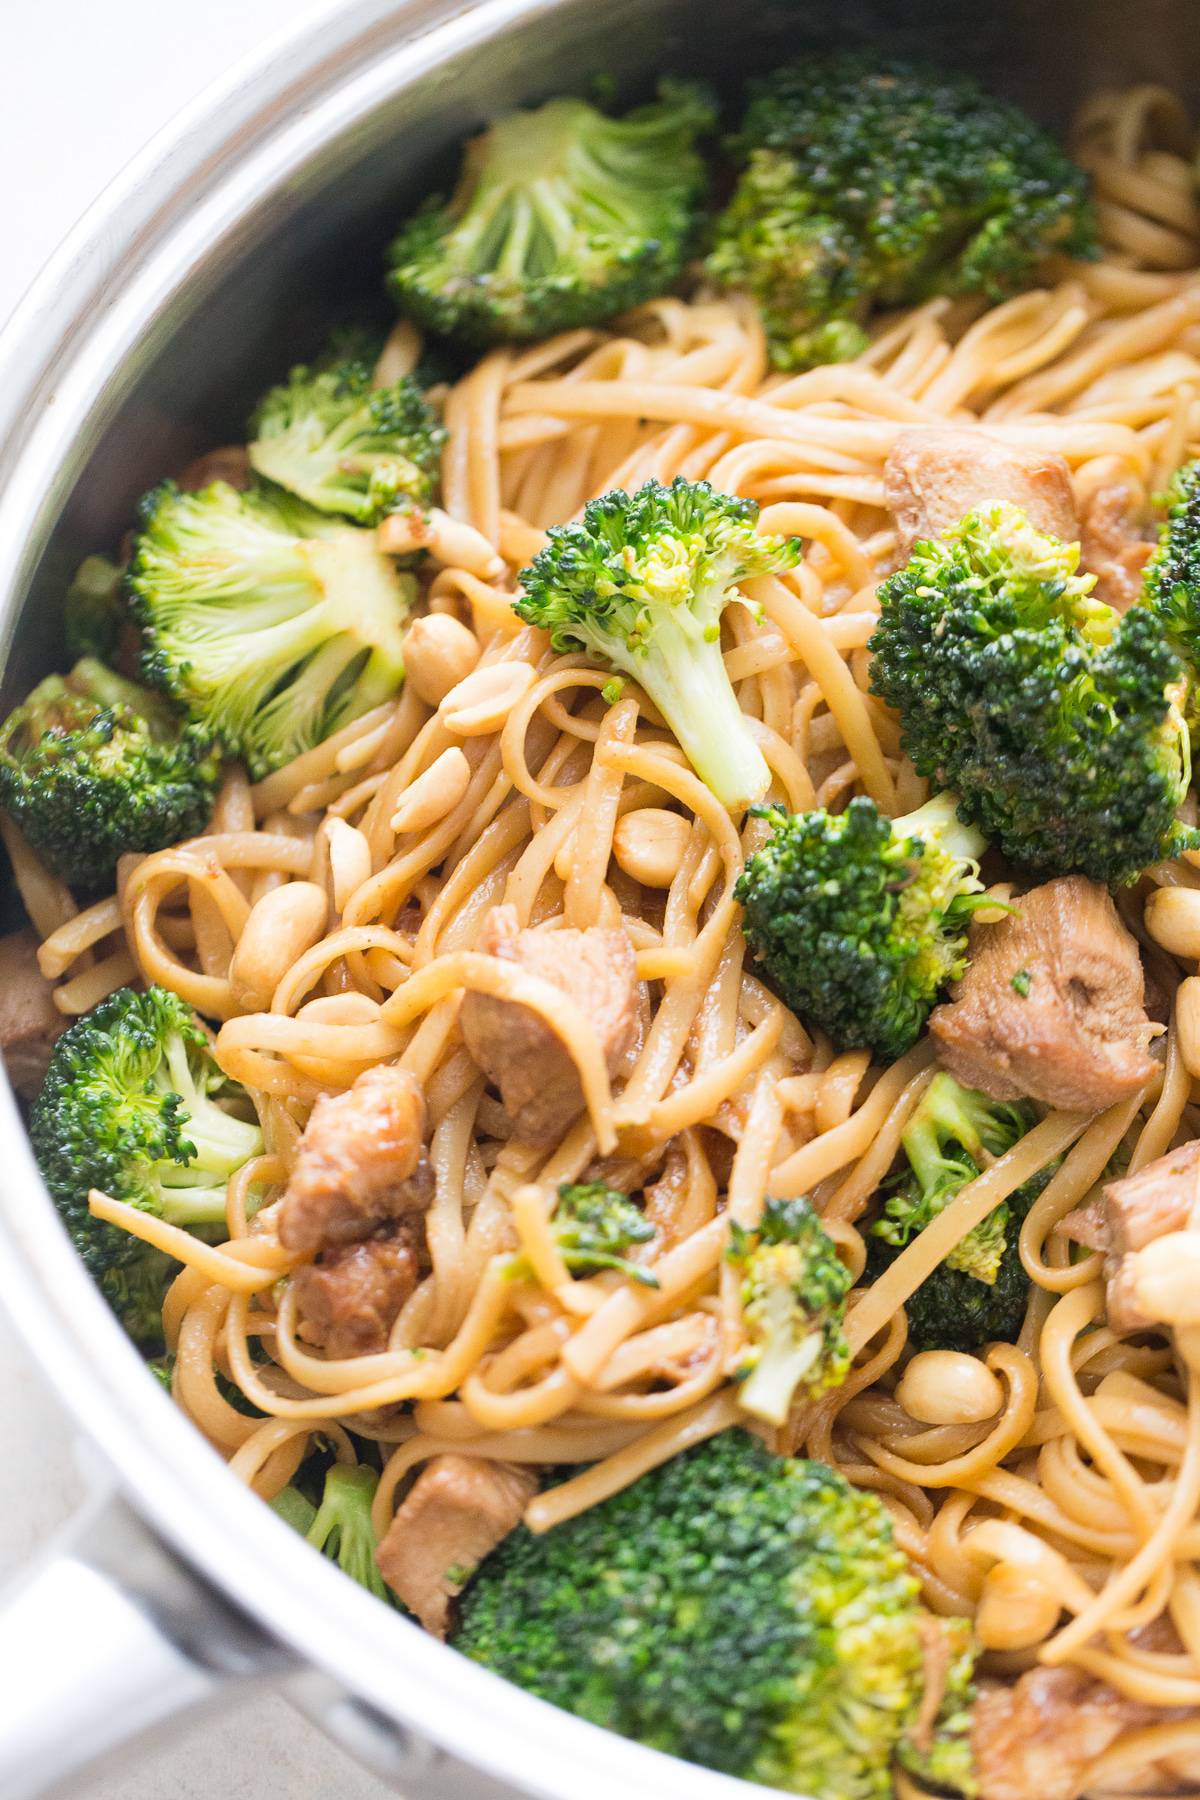 Chicken and Broccoli Stir Fry over Peanut Butter Noodles ...